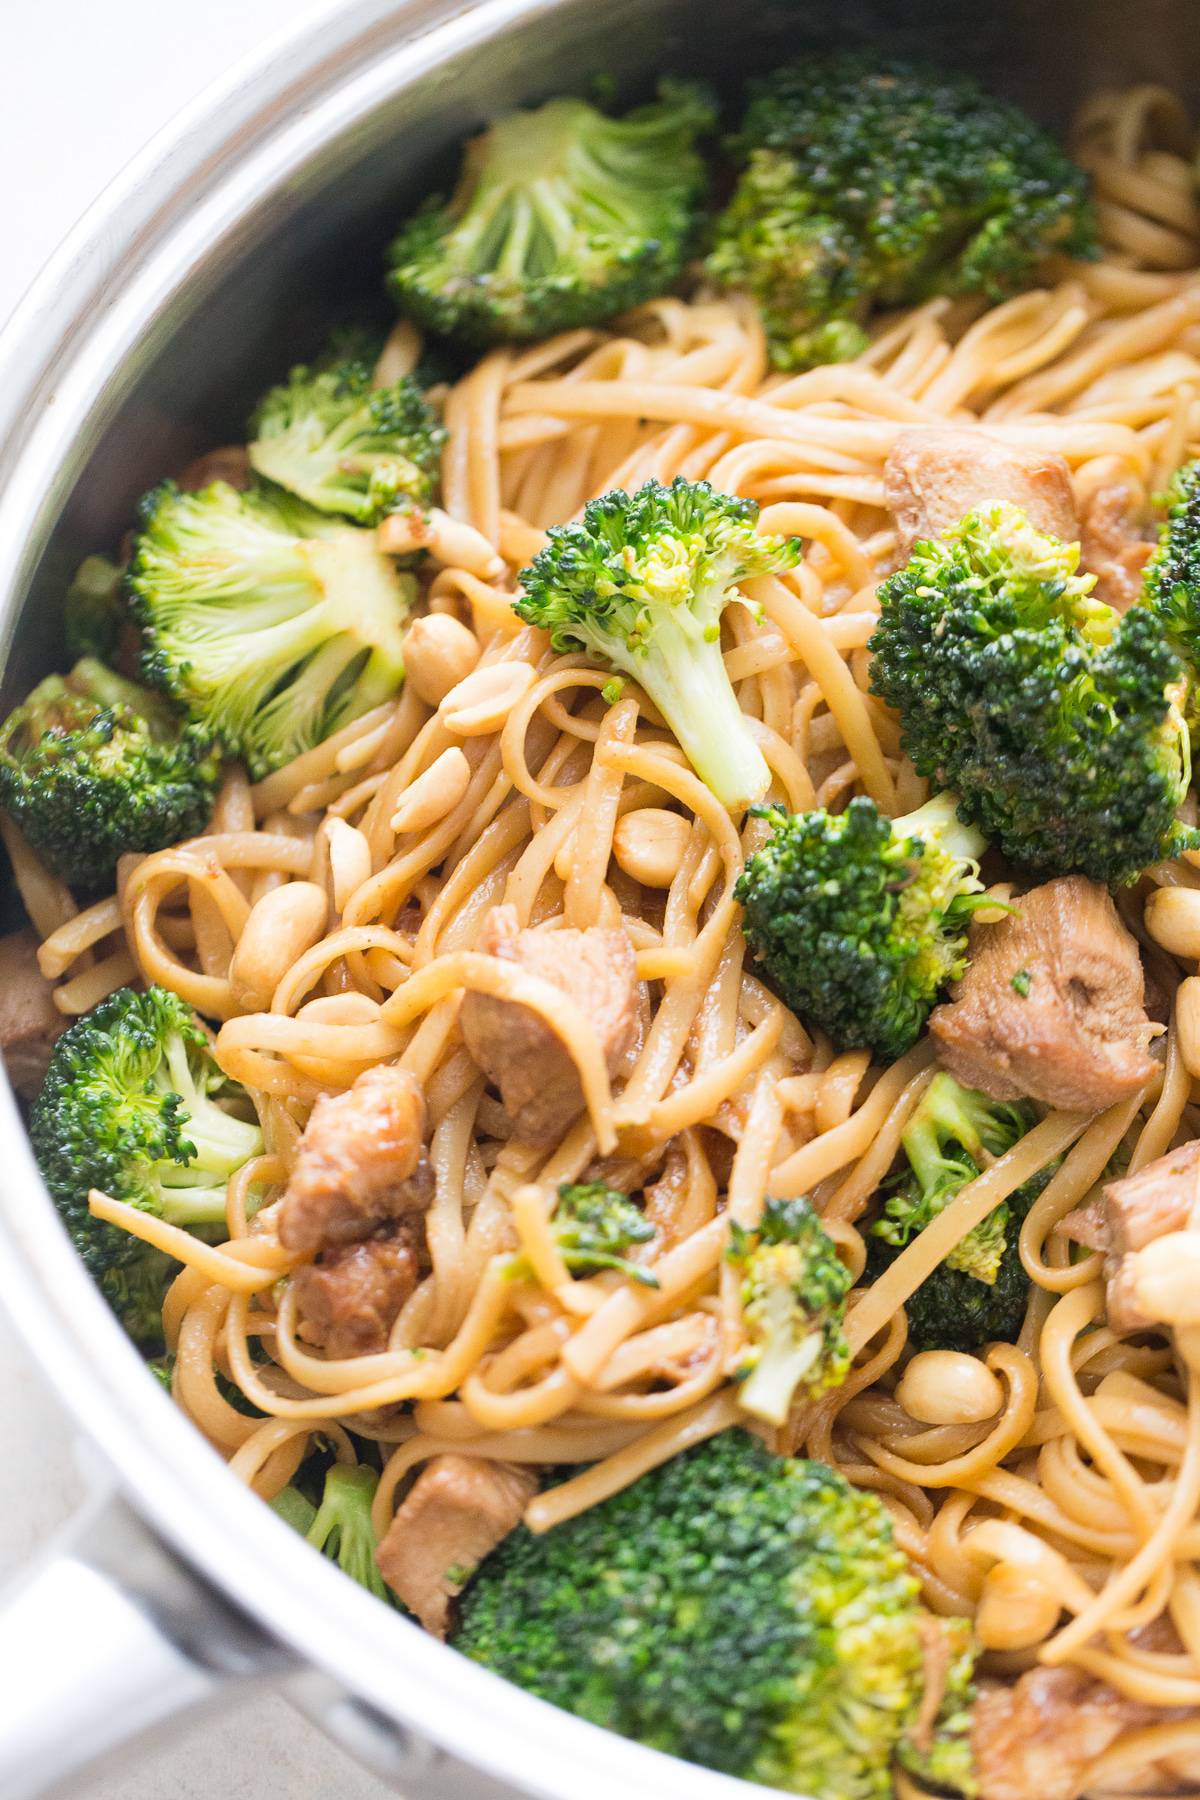 Chicken and Broccoli Stir Fry over Peanut Butter Noodles ...